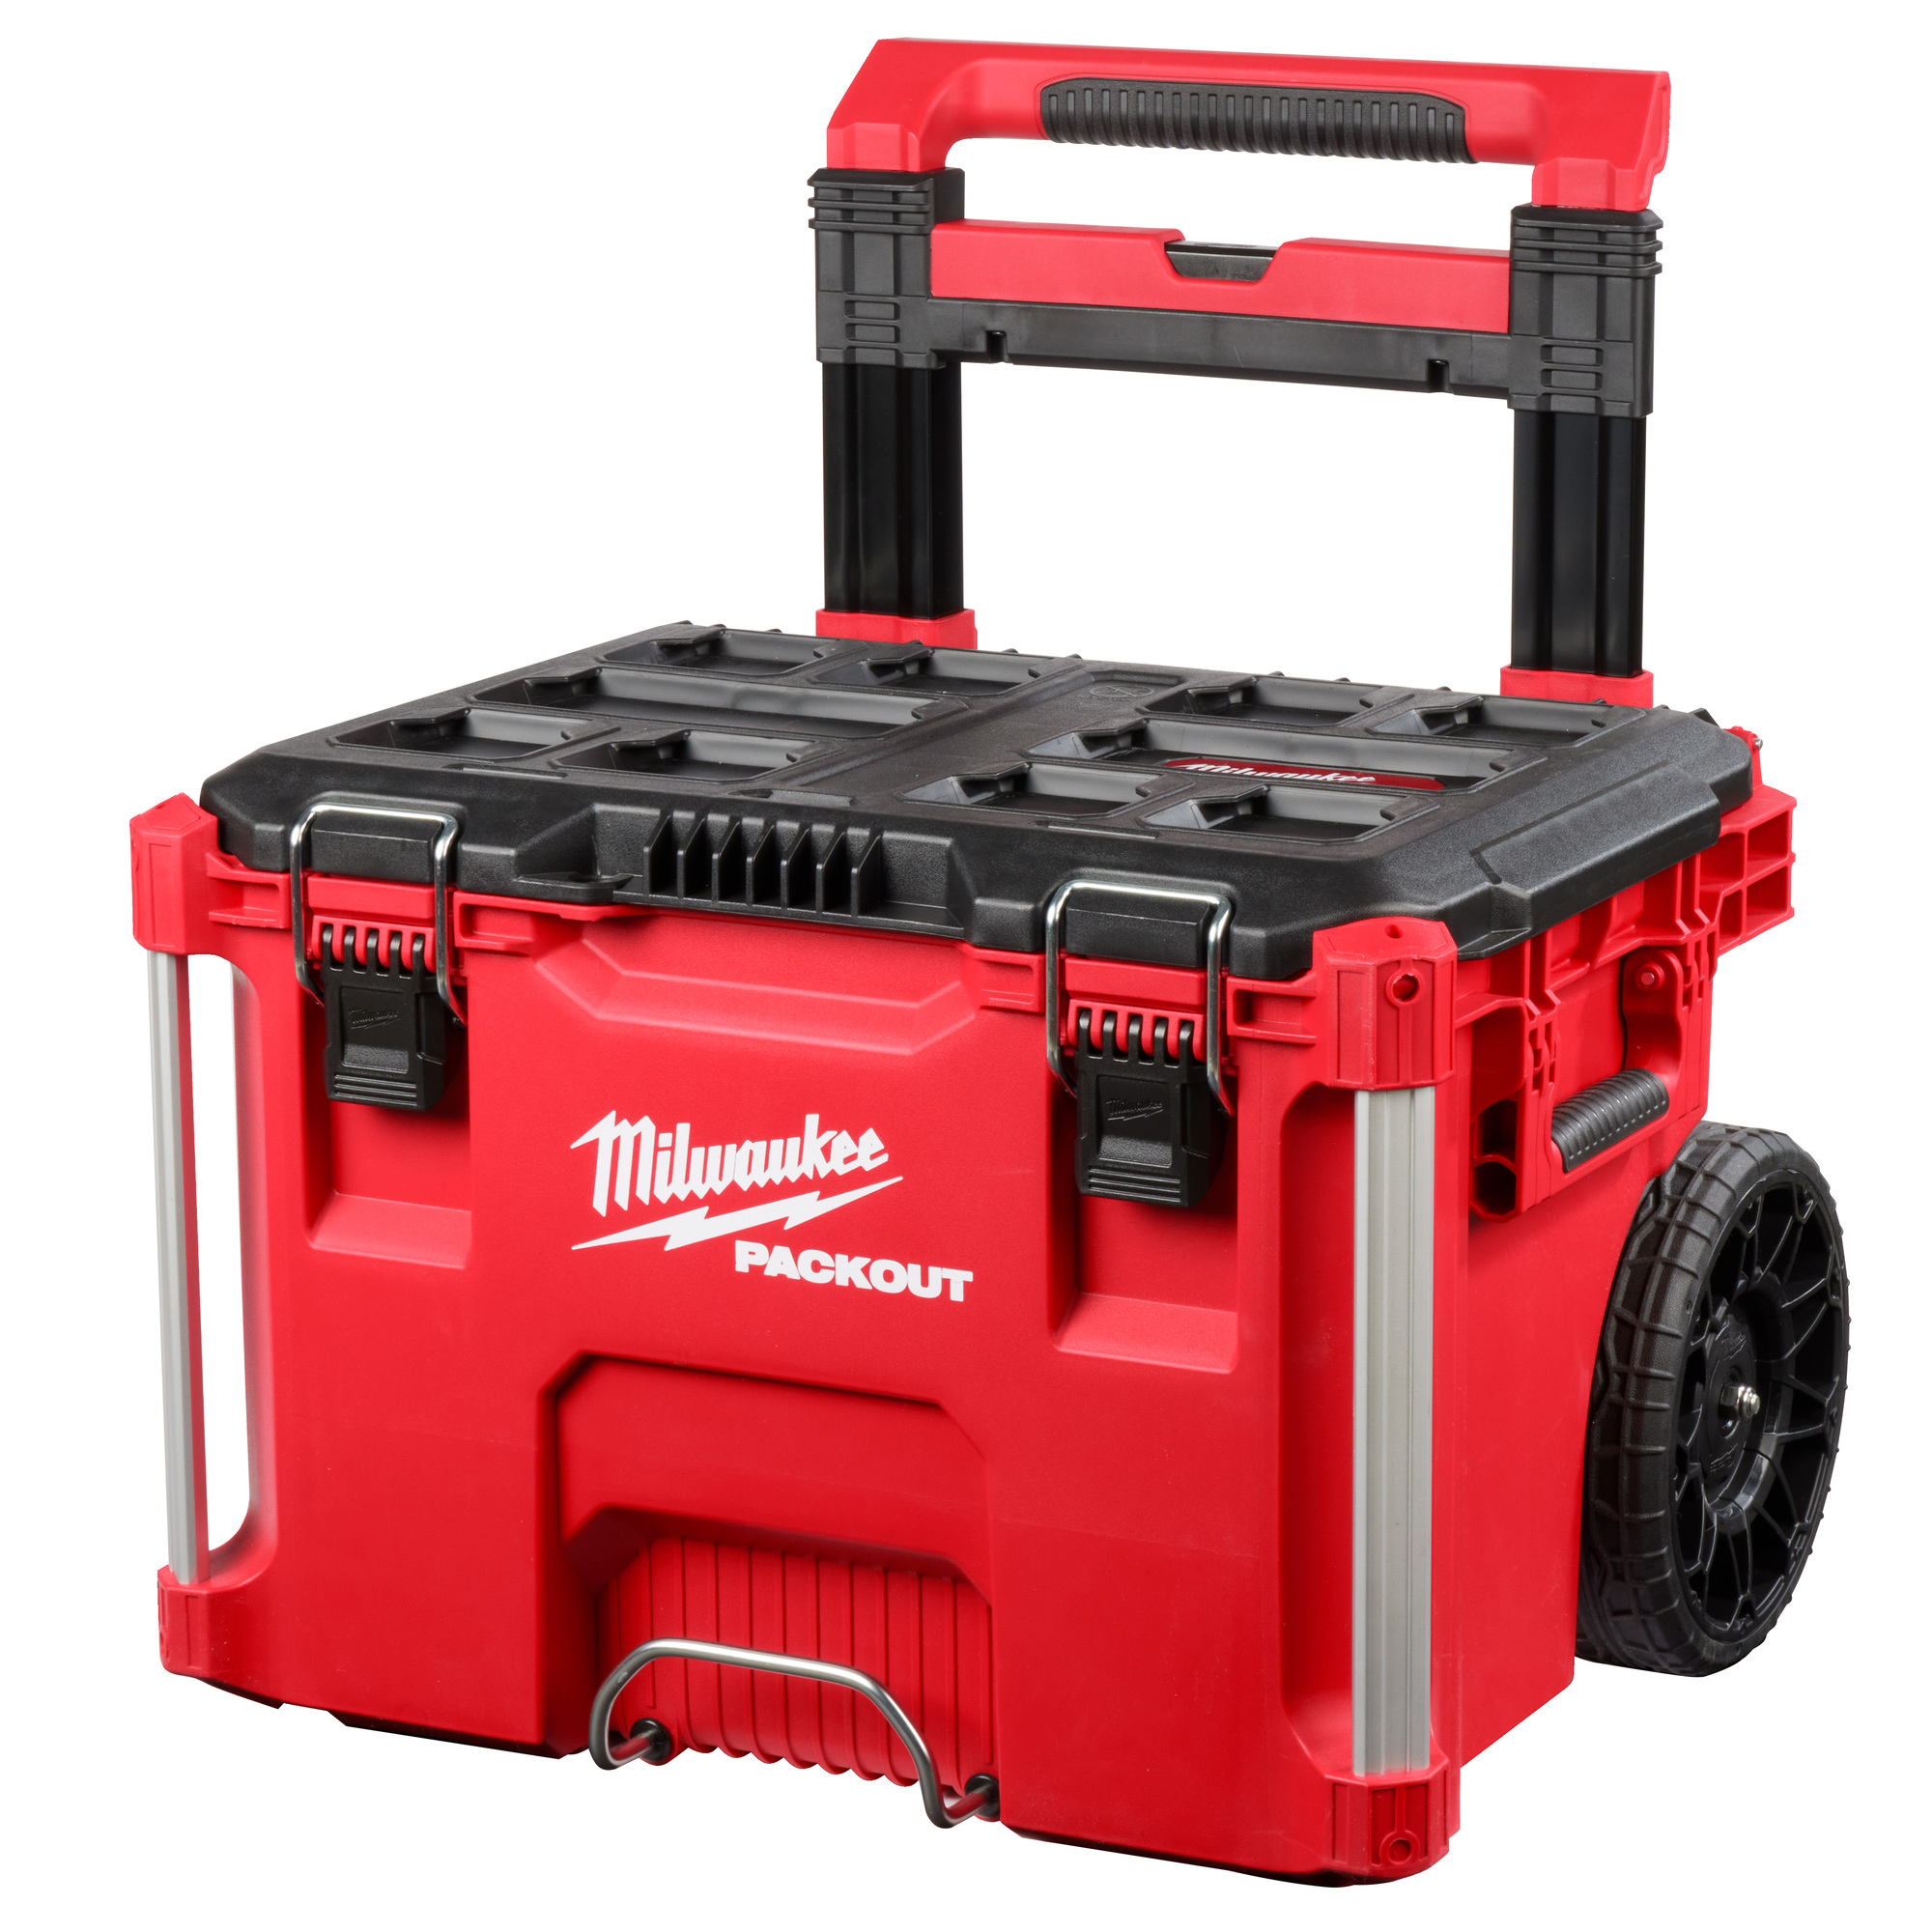 Milwaukee Packout Rolling Toolbox, 22.1Inch L x 18.9Inch W x 25.6Inch H, Model 48-22-8426